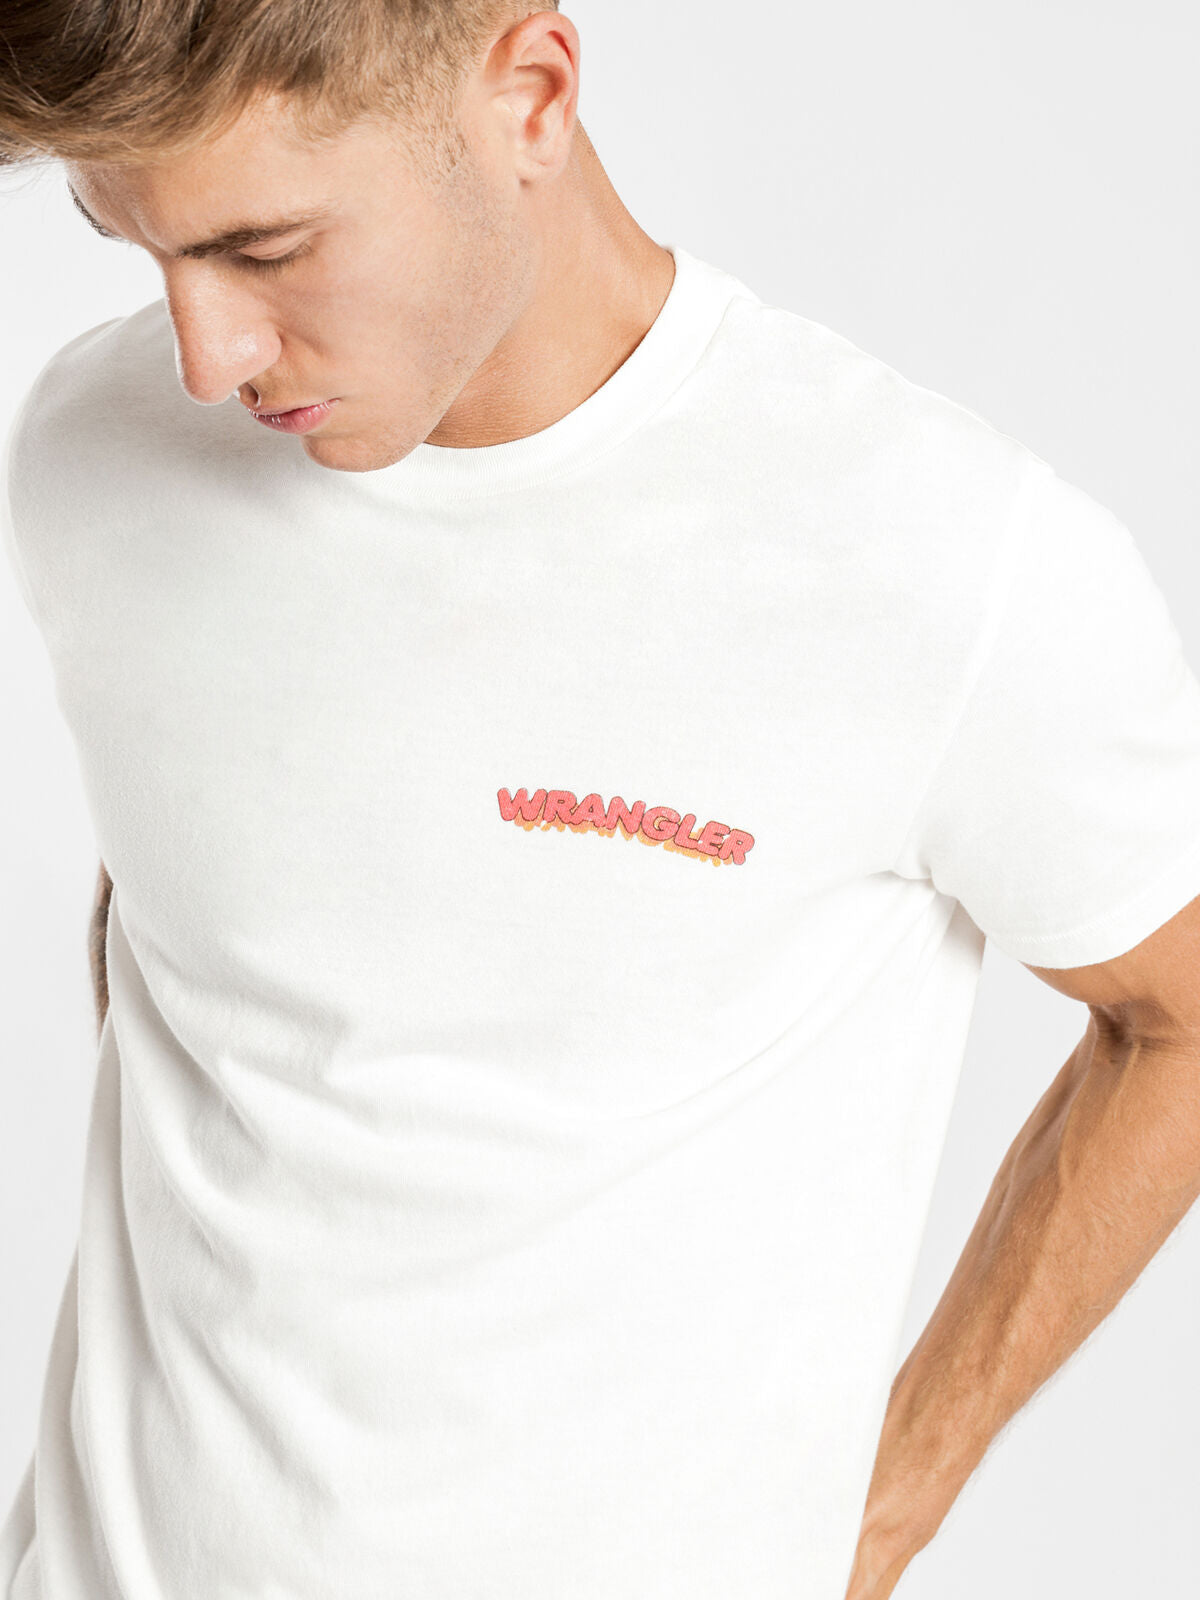 Howlins Short Sleeve T-Shirt in White